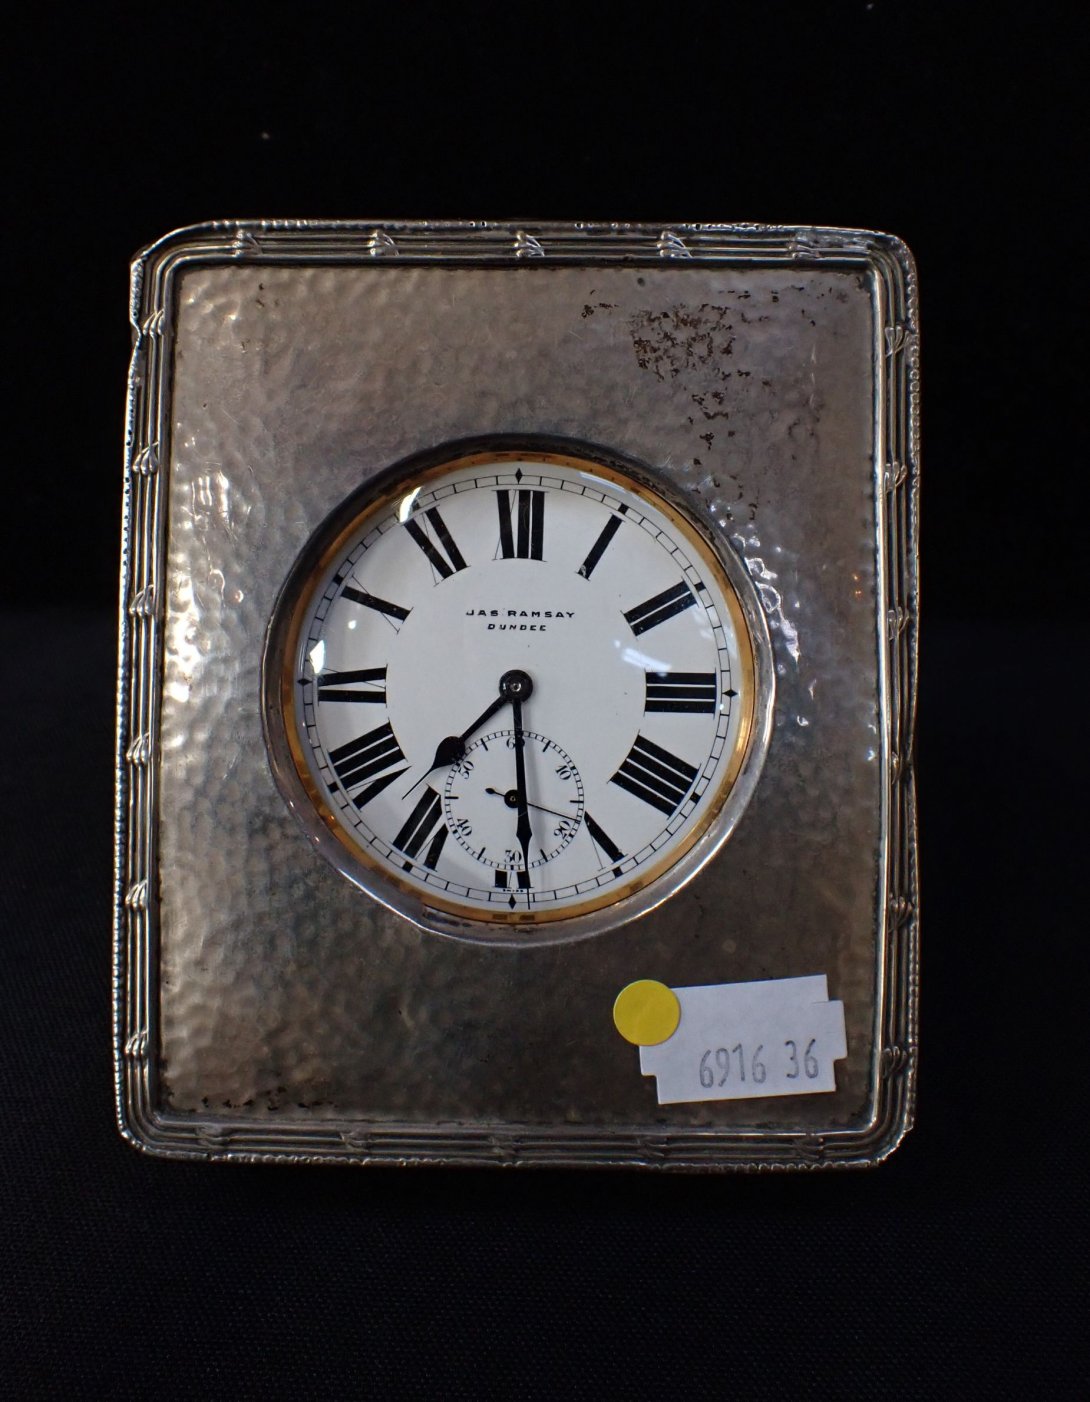 A SILVER-FRONTED GOLIATH WATCH HOLDER